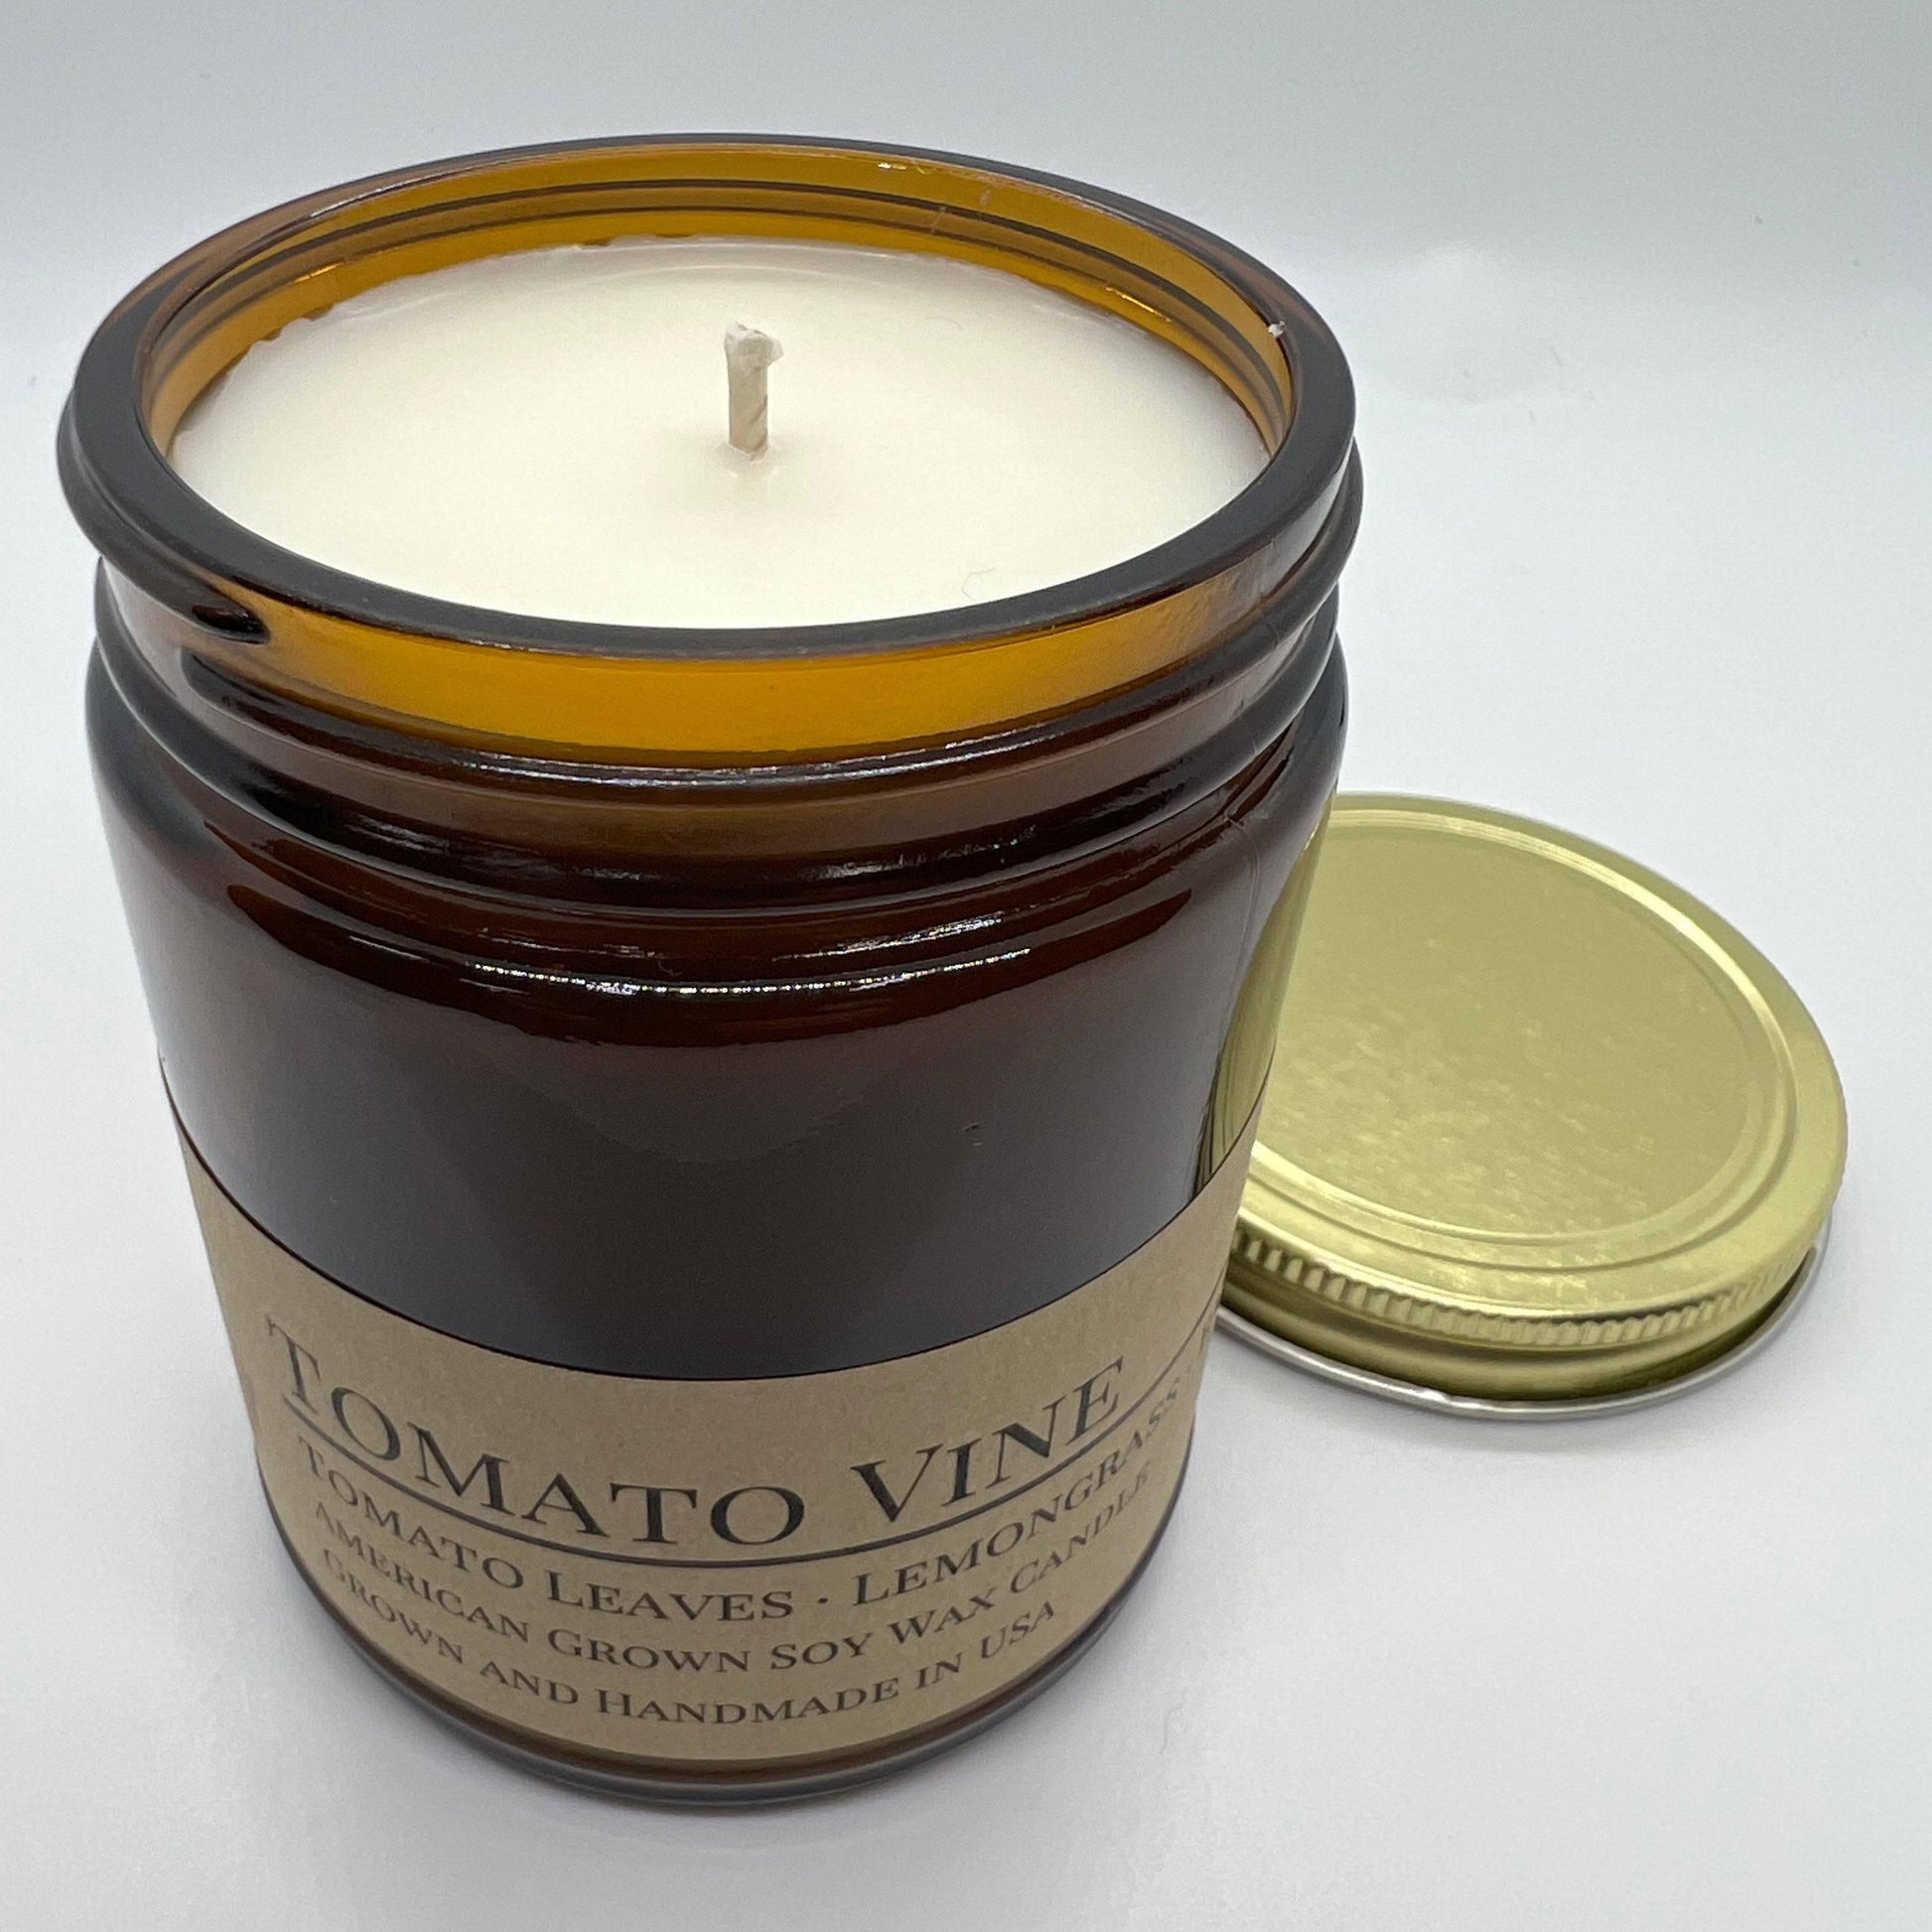 Tomato Vine Soy Wax Candle | 9 oz Amber Apothecary Jar - Prairie Fire Candles & Lavender